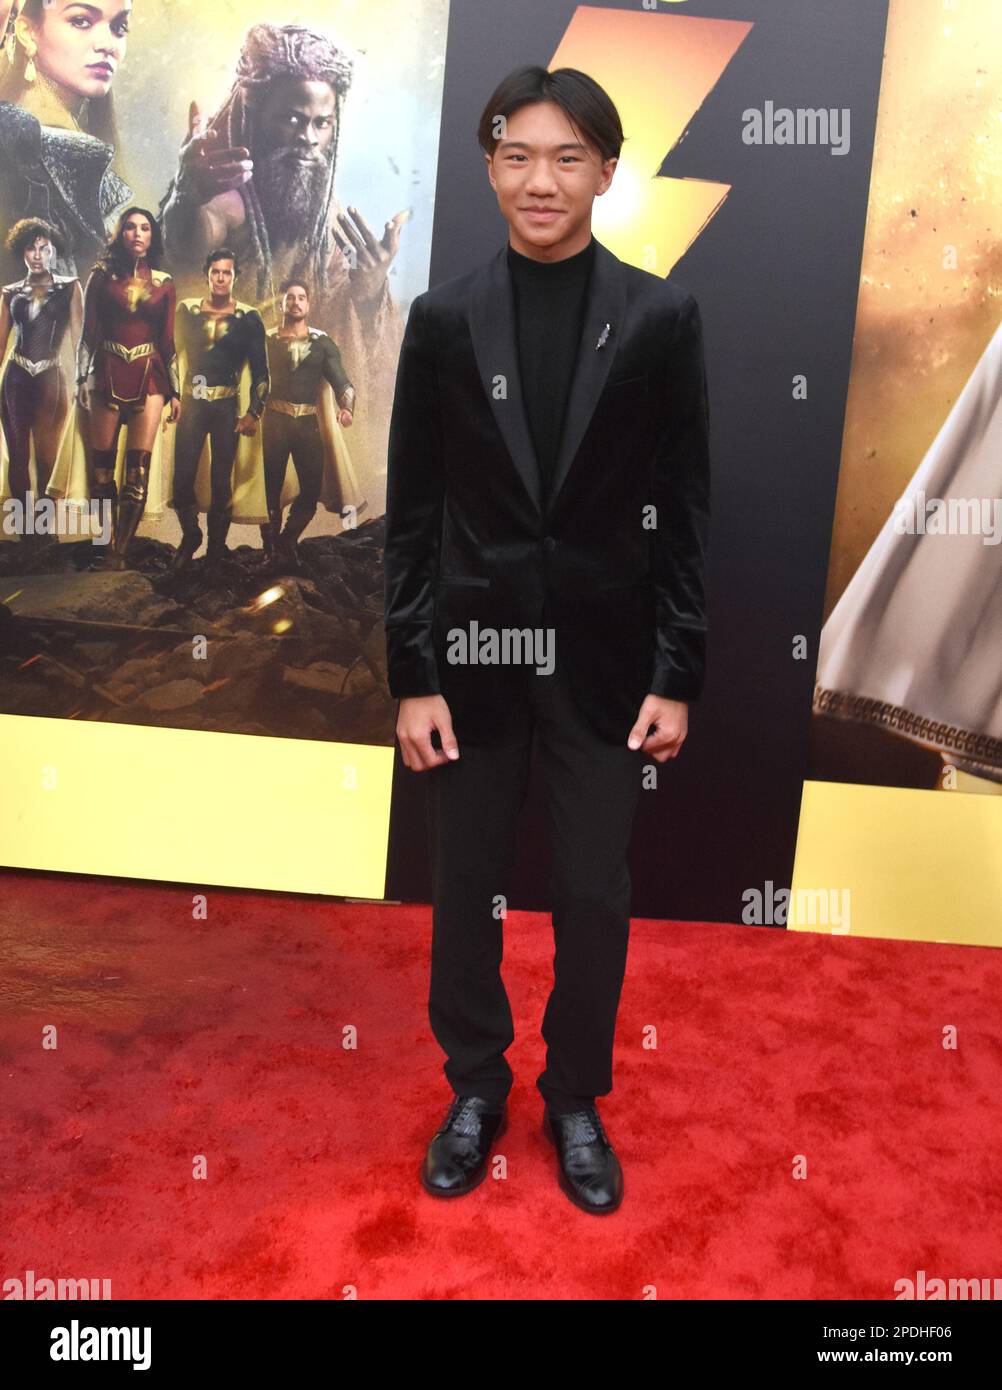 Los Angeles California Usa 14th March 2023 Actor Ian Chen Attends The Premiere Of Warner Bros Shazam! Fury Of The Gods At Regency Village Theatre On March 14 2023 In Los Angeles California Usa Photo By Barry Kingalamy Live News 2PDHF06 